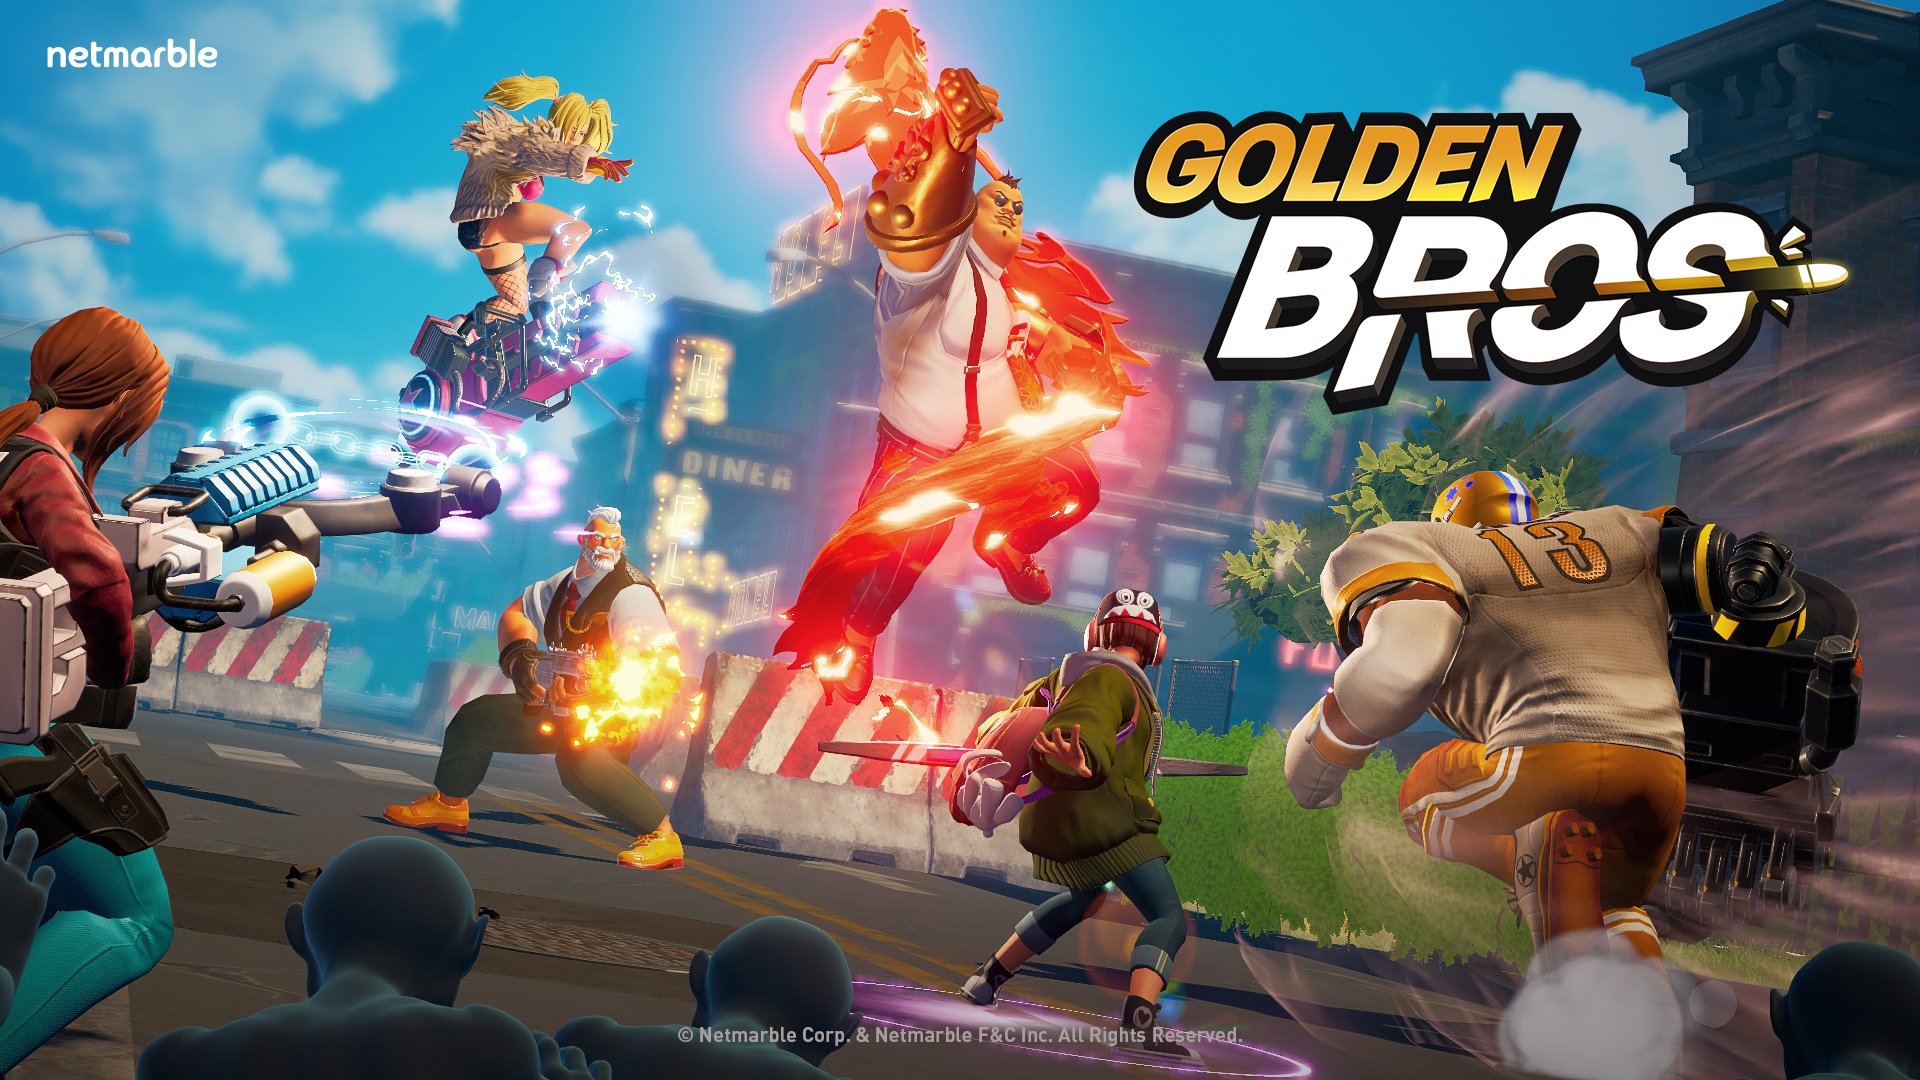 Netmarble to launch a 3v3 play to earn shooter, Golden Bros, with blockchain technology